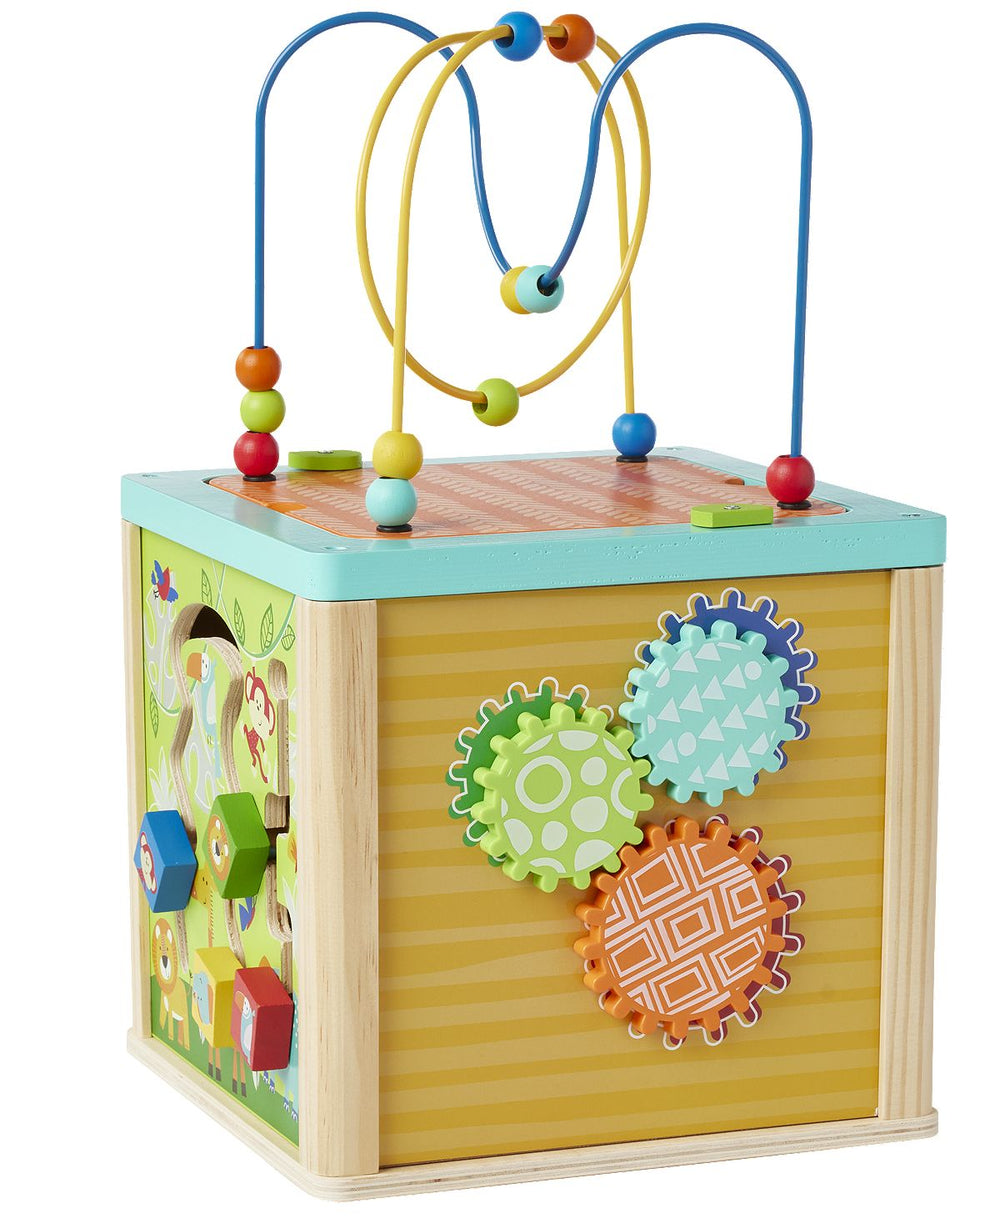 Imaginarium 5-in-1 Wooden Activity Cube - Educational Learning Toy